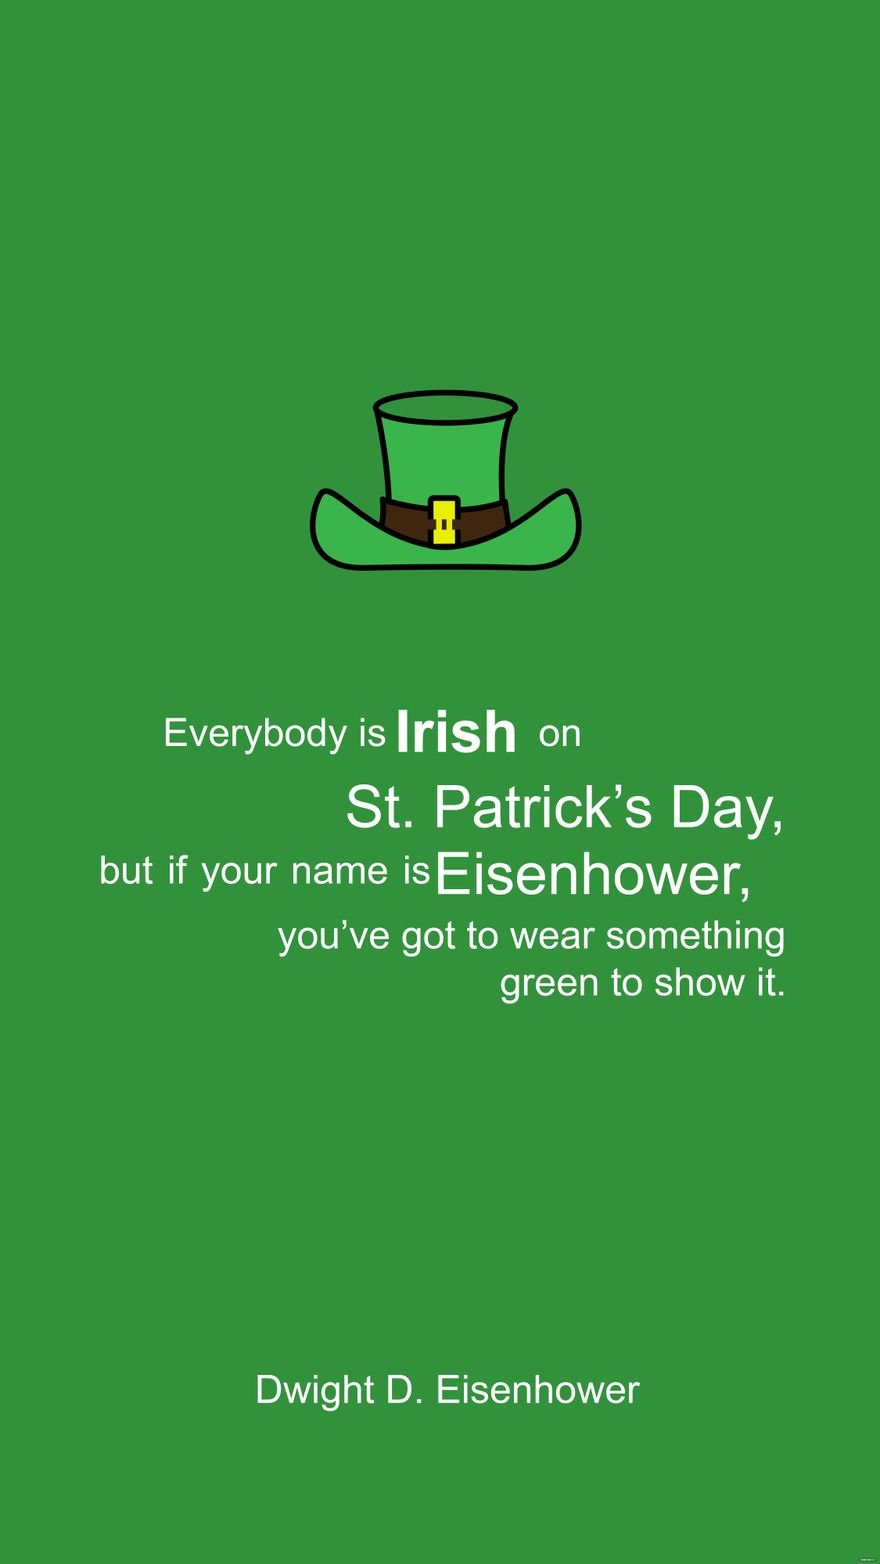 Dwight D. Eisenhower - Everybody is Irish on St. Patrick’s Day, but if your name is Eisenhower, you’ve got to wear something green to show it. in JPEG